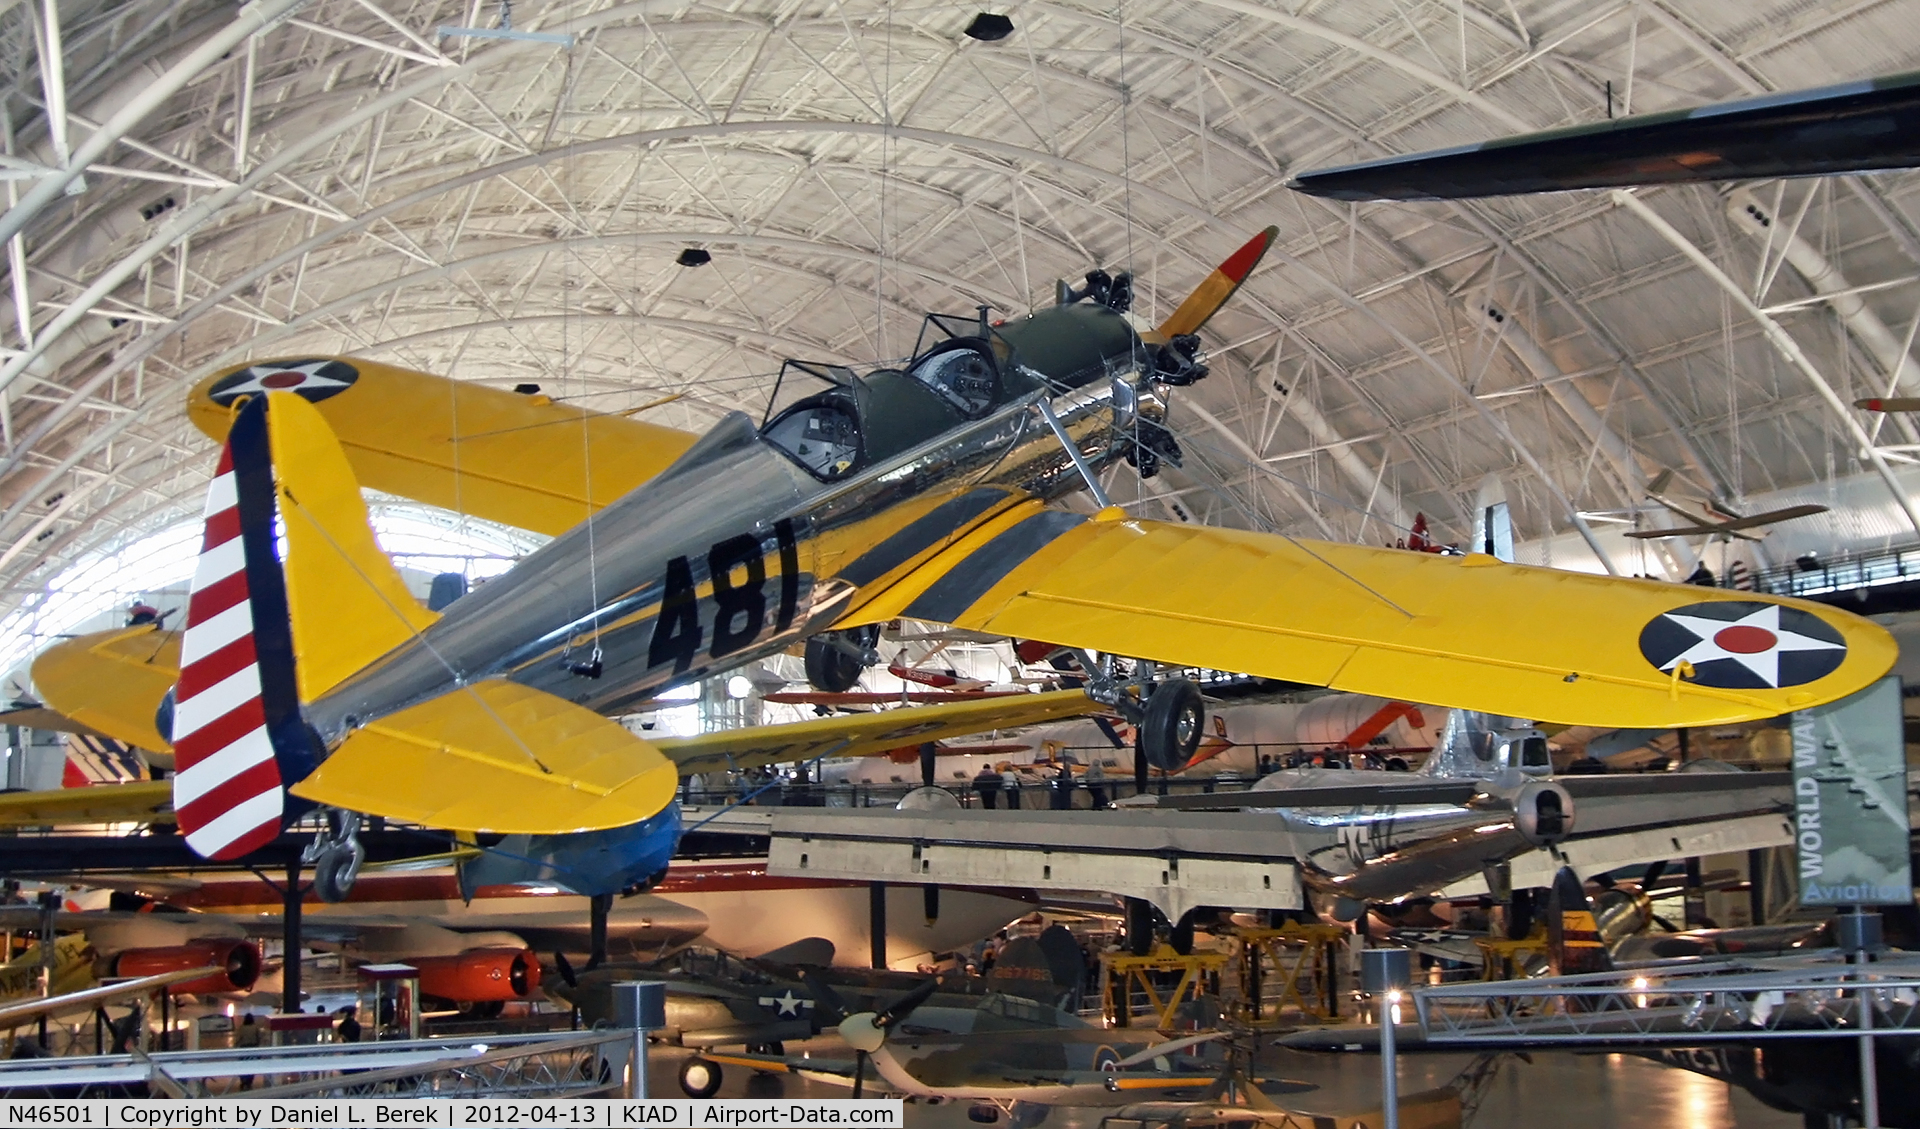 N46501, 1943 Ryan Aeronautical ST3KR C/N 1777, This beautiful aircraft is located near the front entrance to the Udvar-Hazy Center.